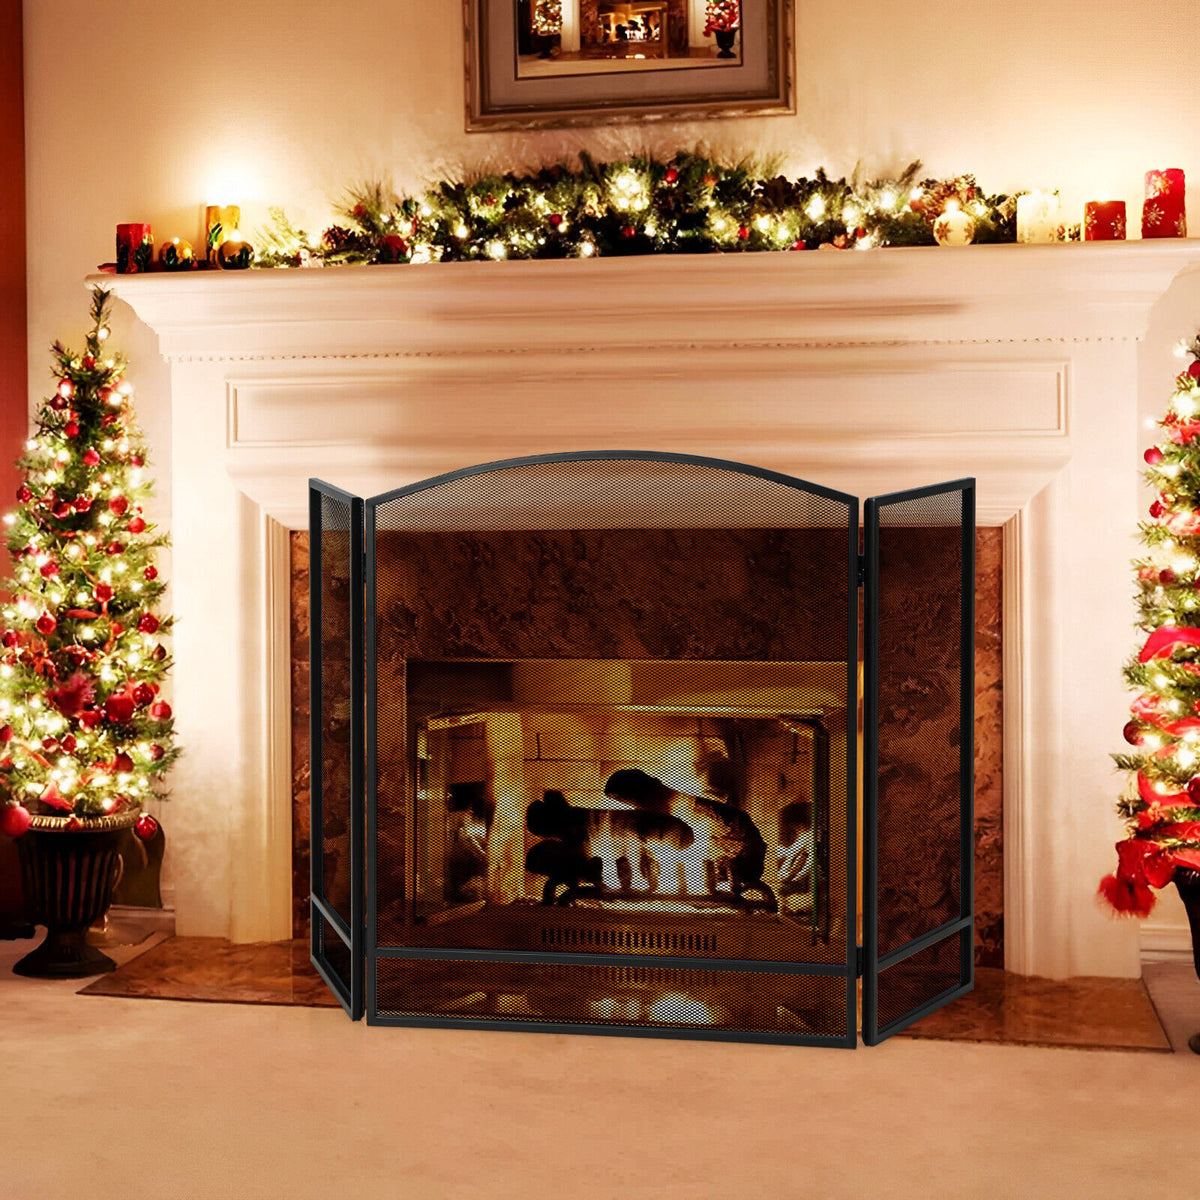 3-panel Foldable Wrought Iron Fireplace Screen with Mesh